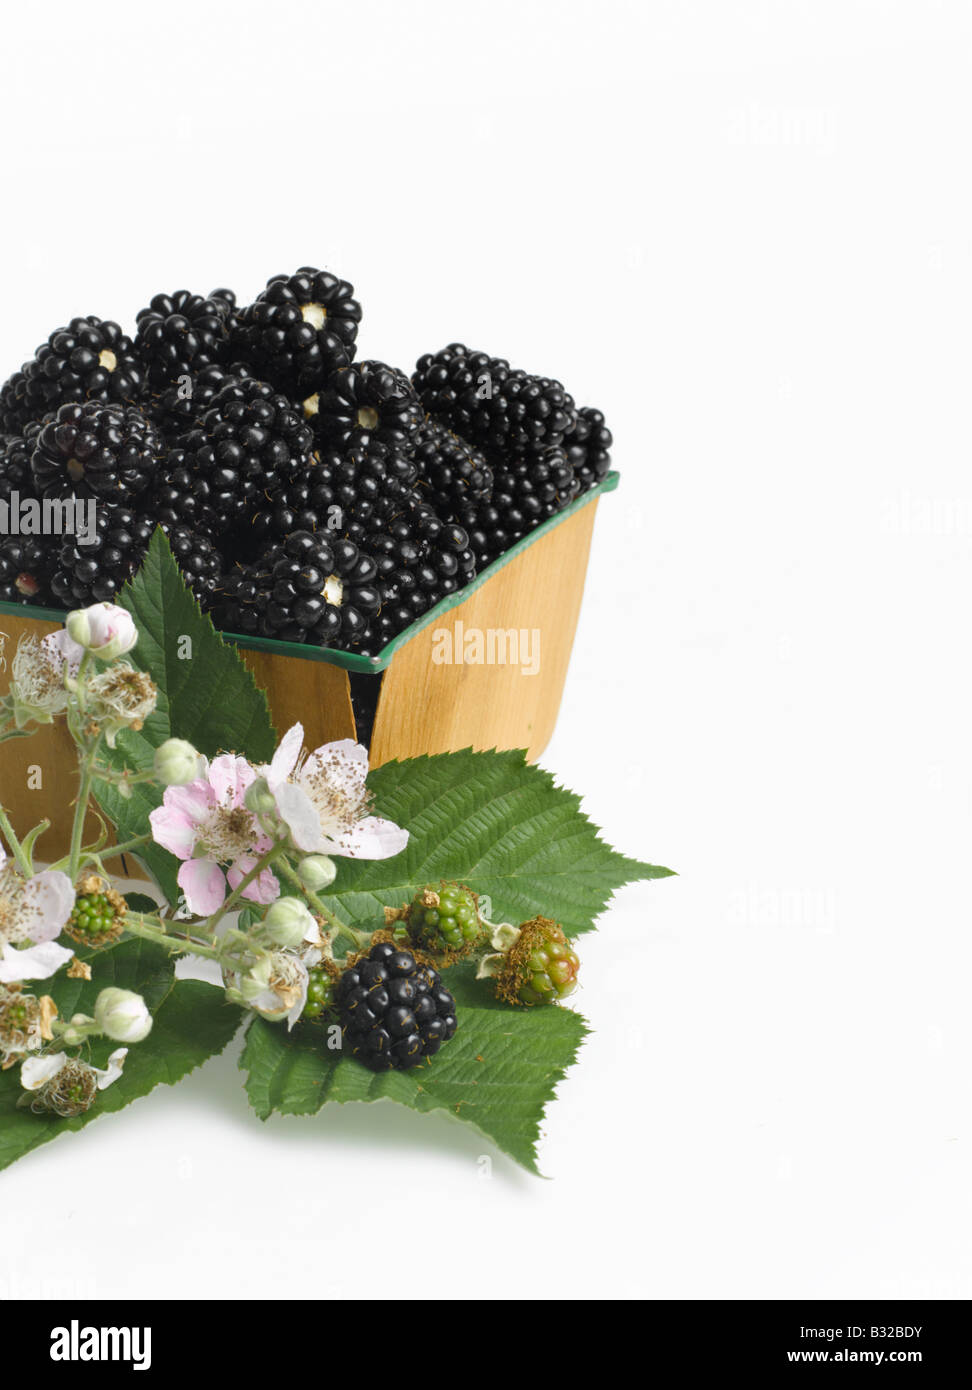 Basket of blackberries and blackberry branch cut out on white background Stock Photo